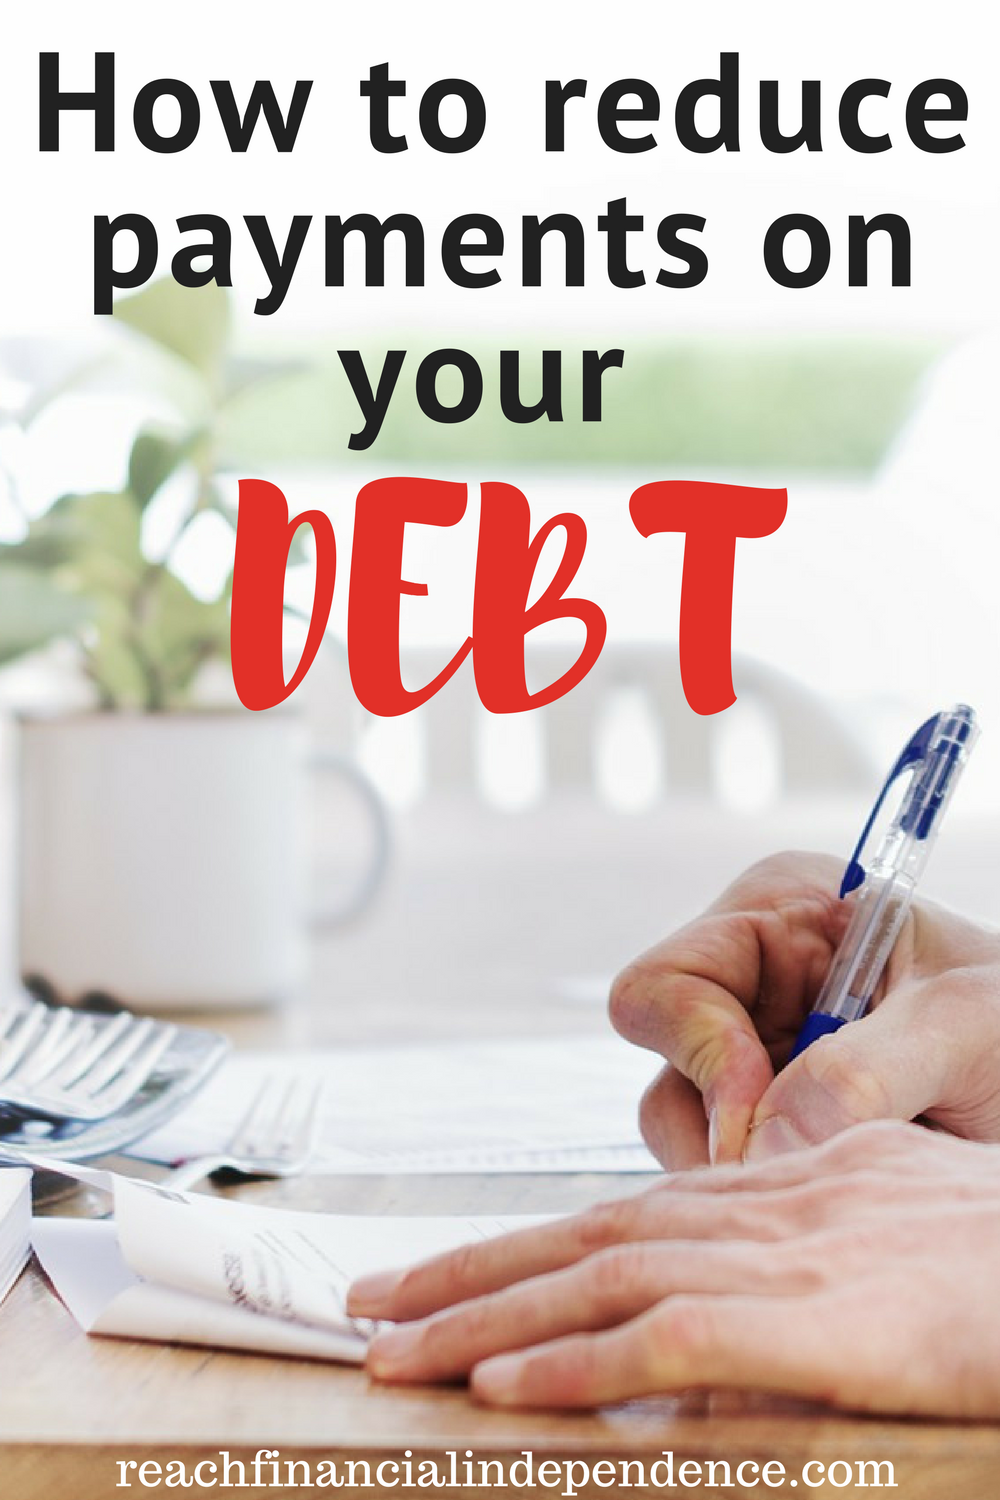 How to reduce payments on your debt: Wow! I love this one! After reading this, now I'm totally debt free!  Thanks for sharing!